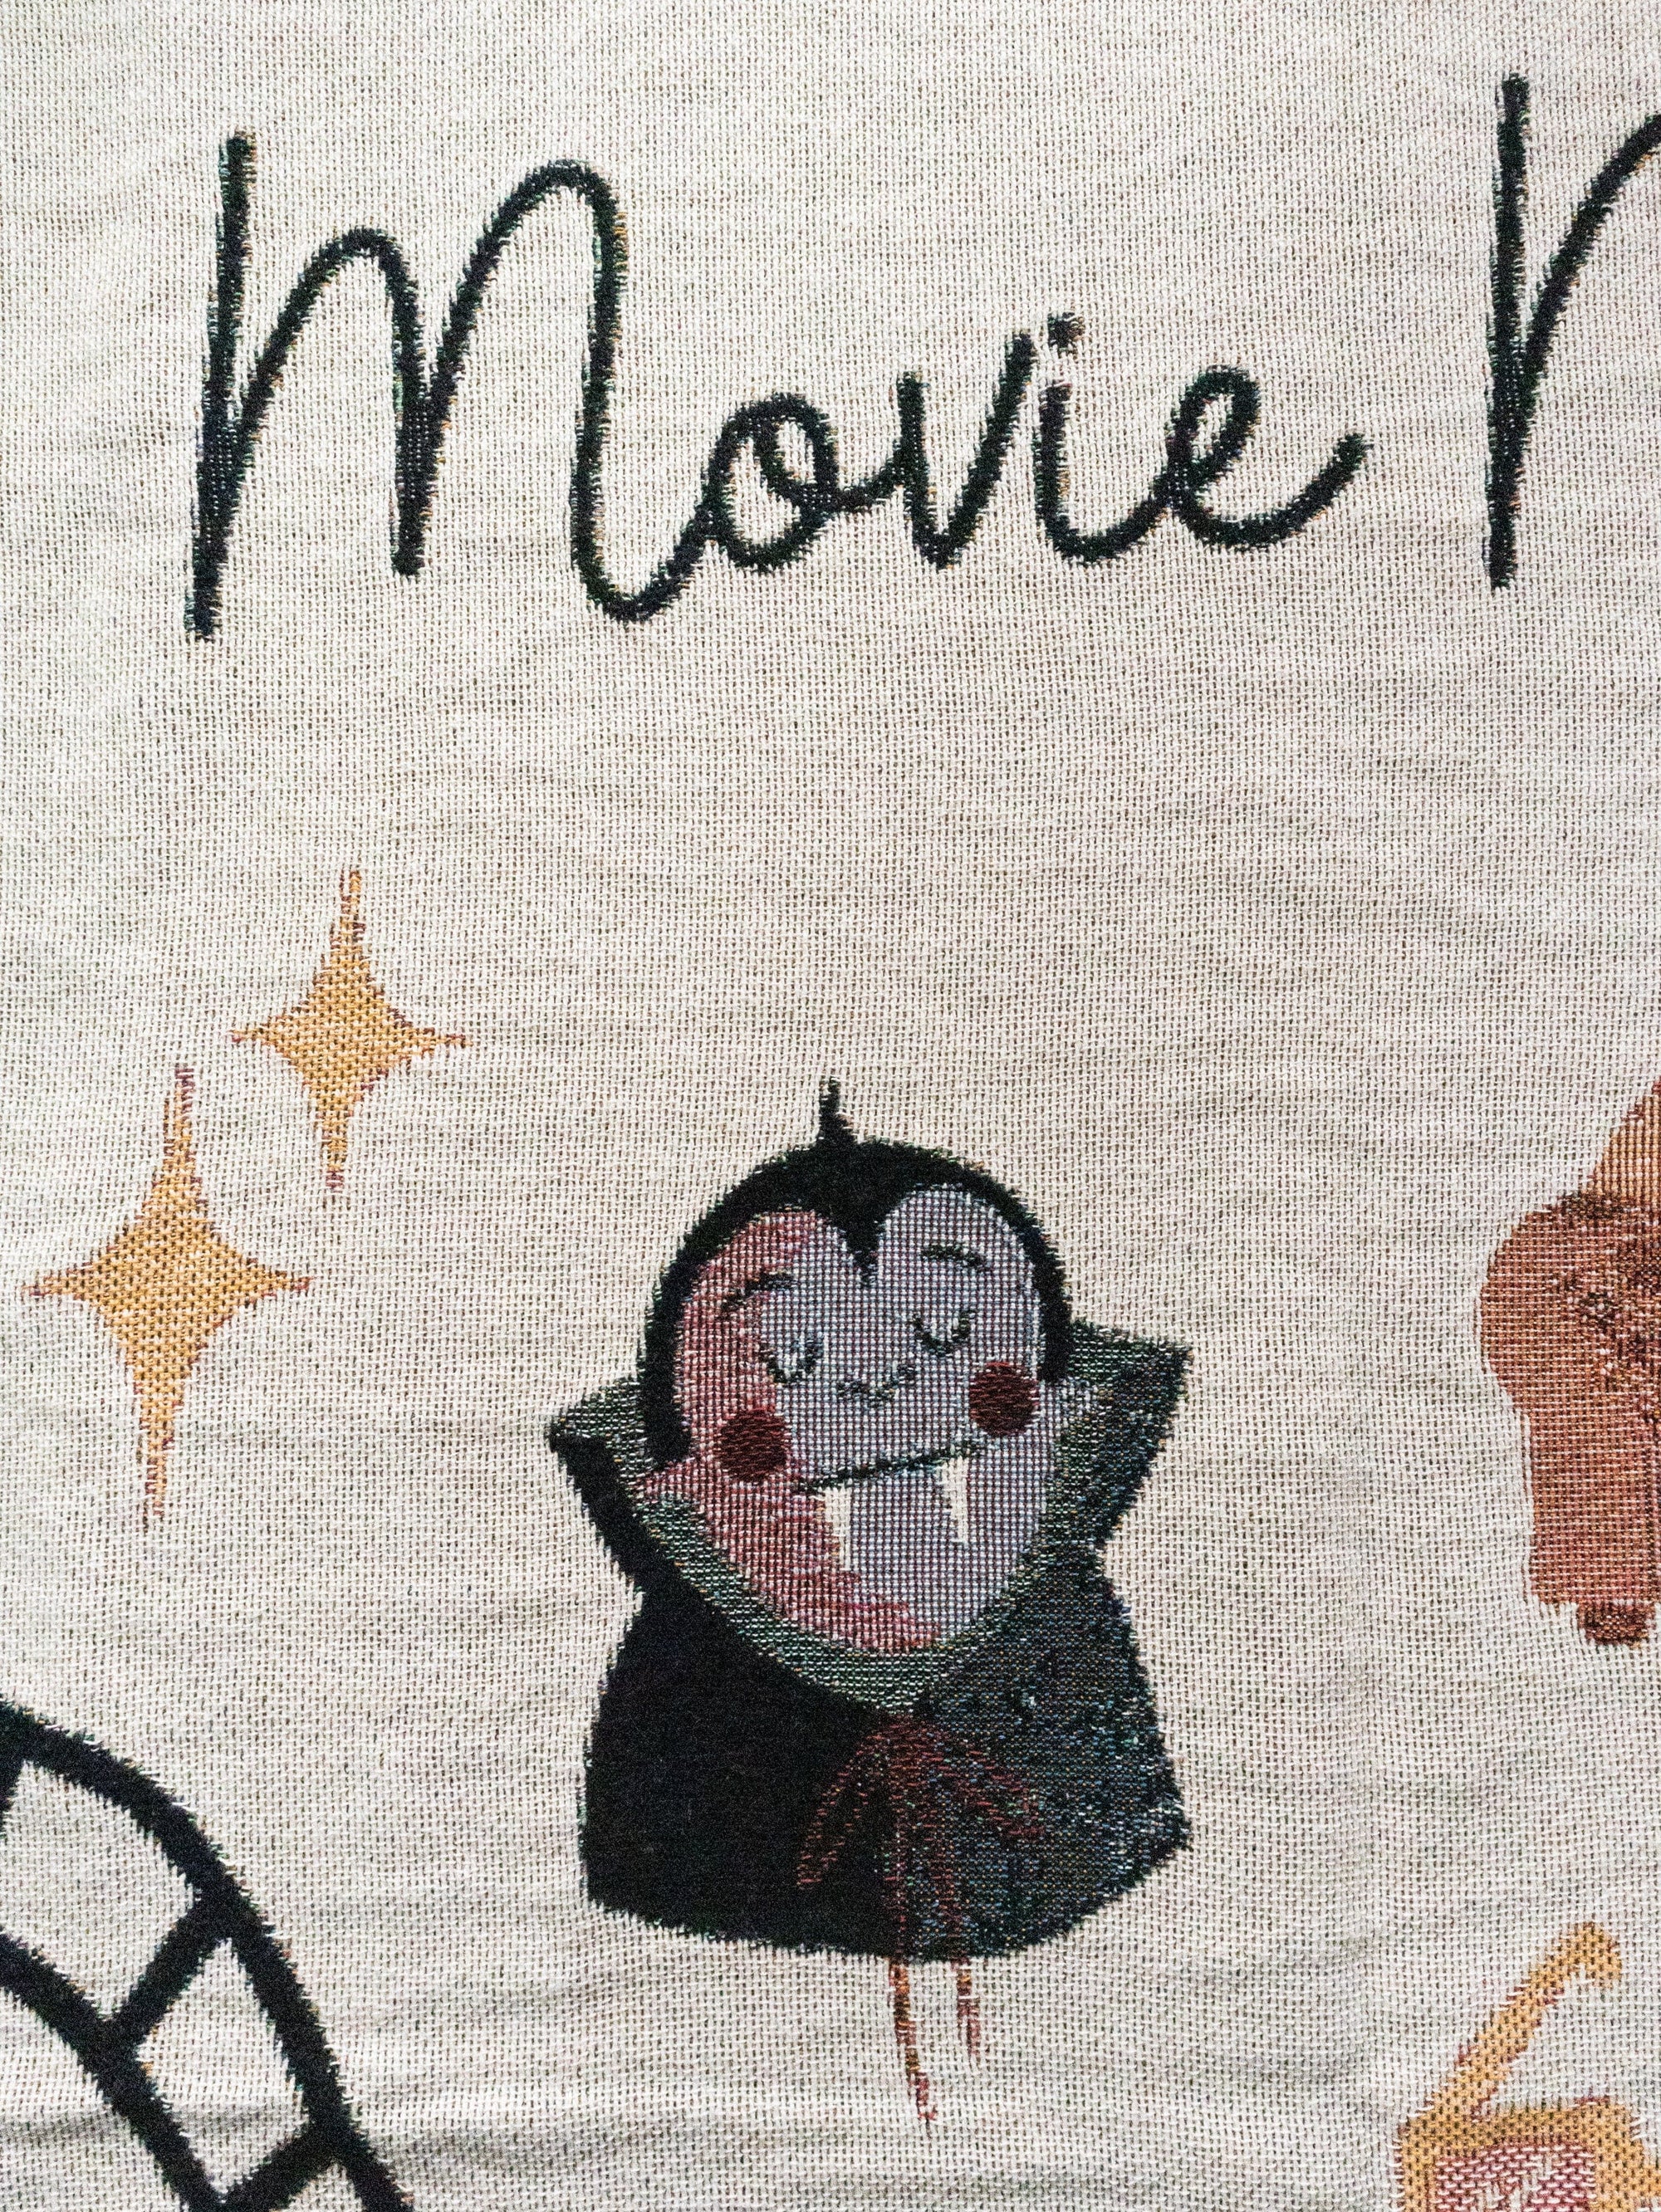 Personalized Movie Blanket